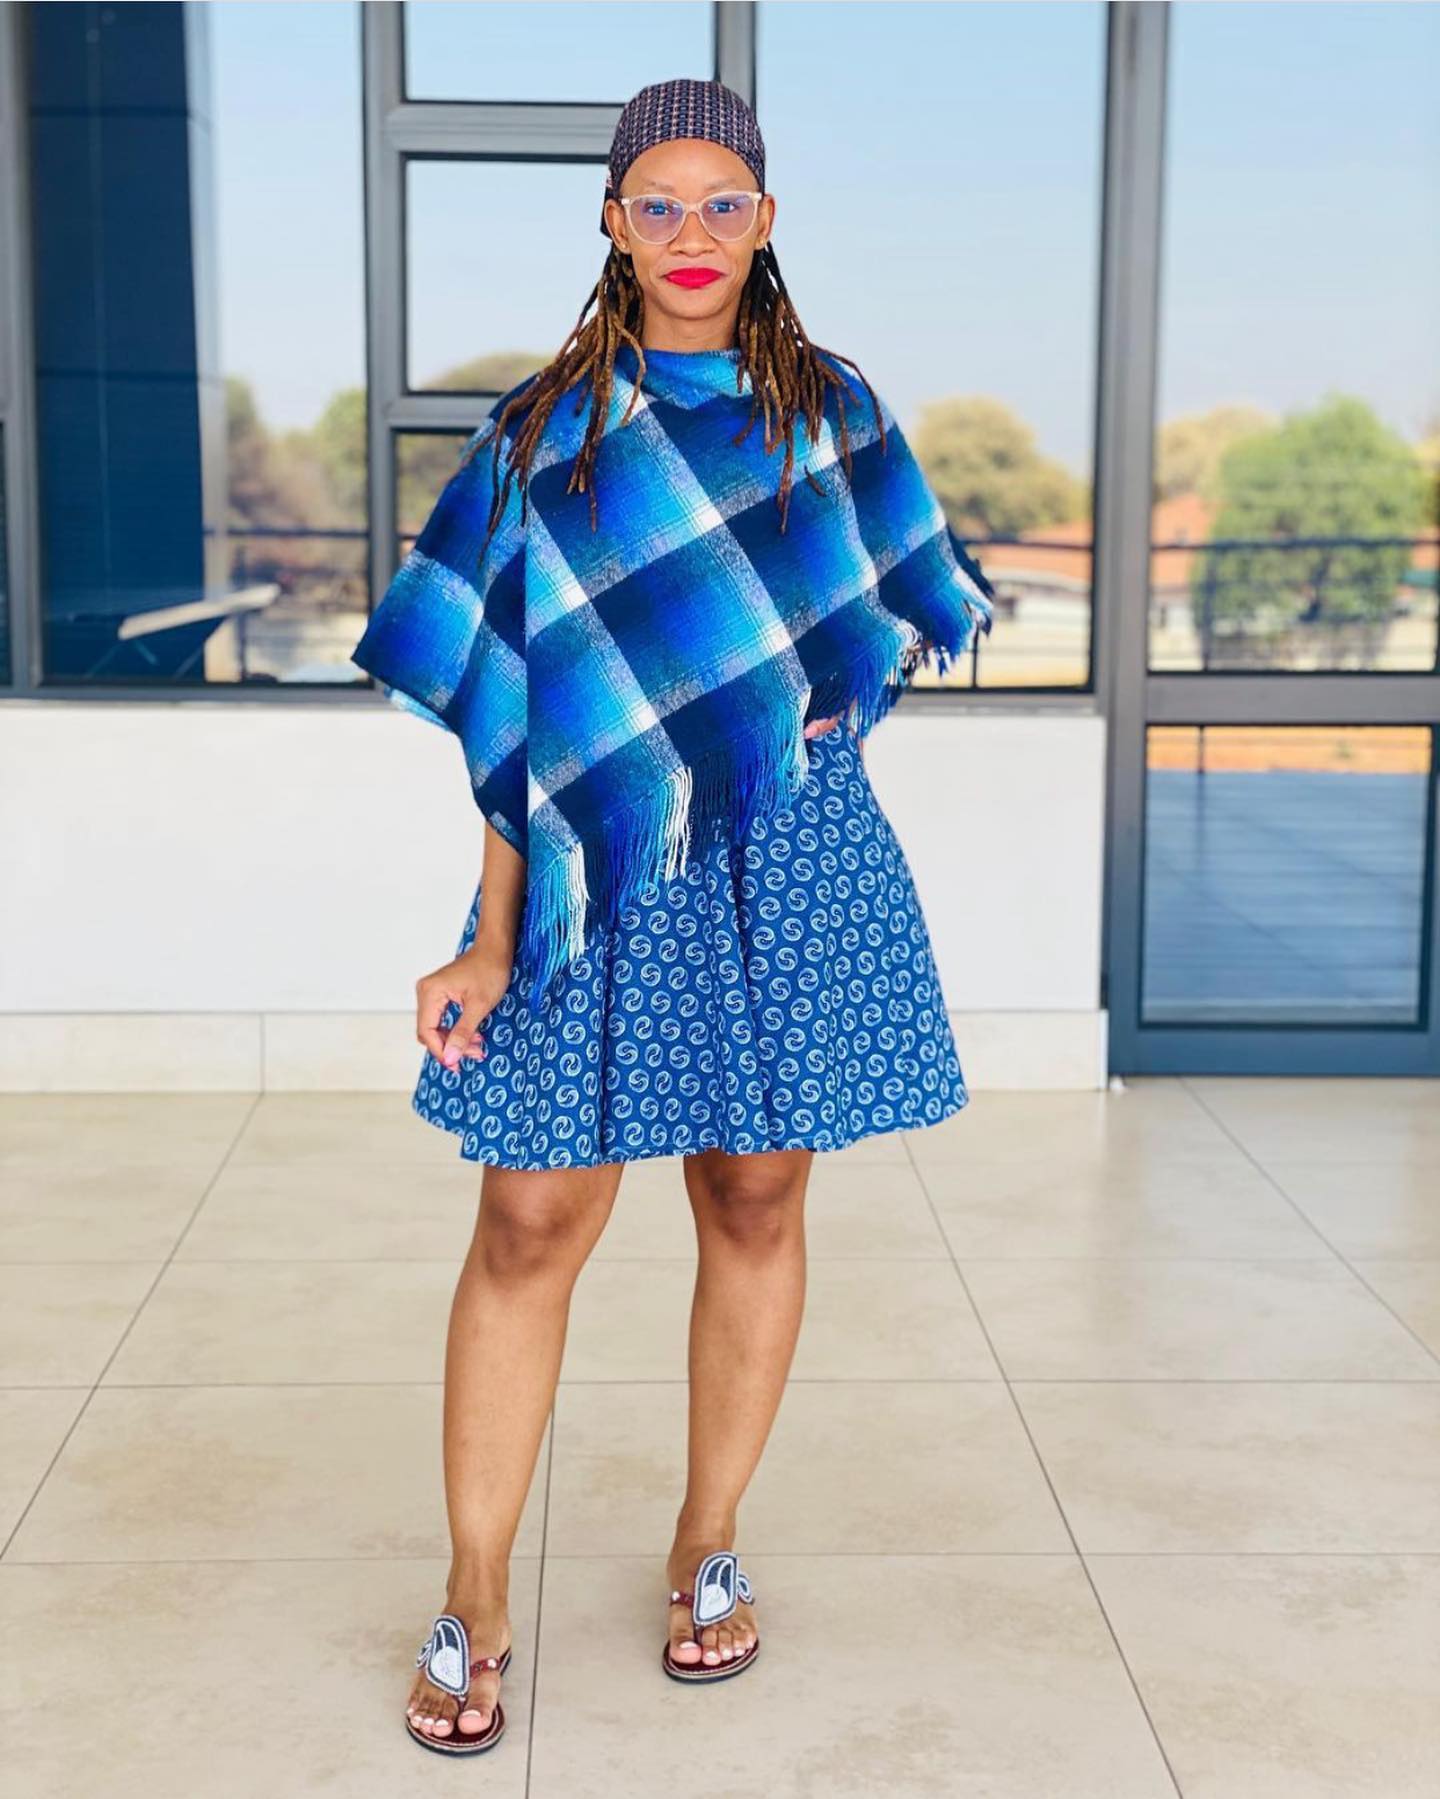 Amazing Tswana Dresses: A Fabric Steeped in History and Tradition 20